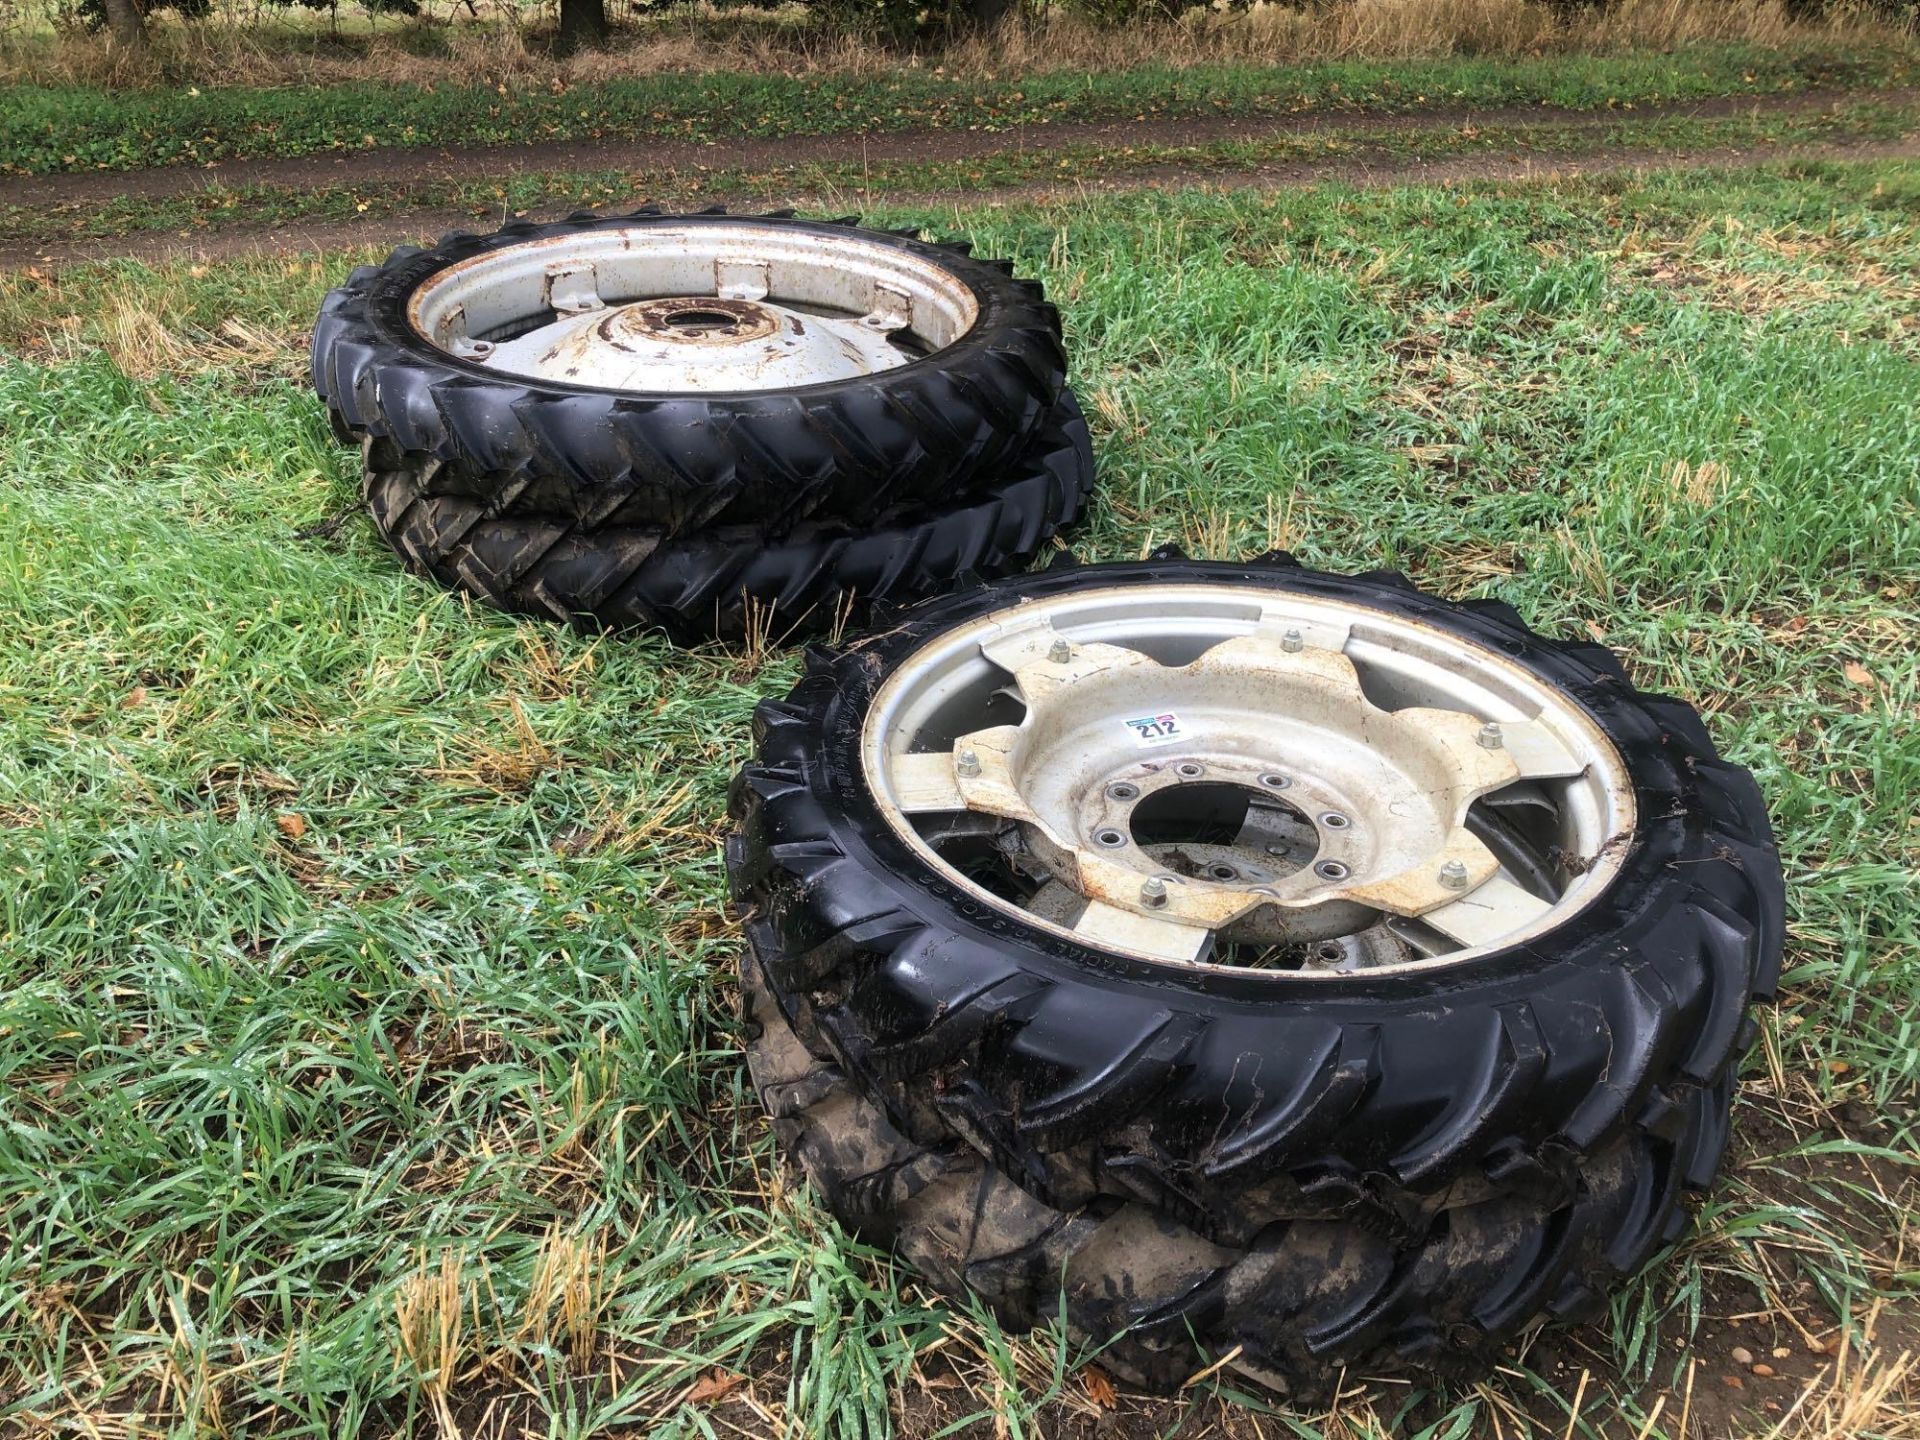 Set Kleber 8.3/8R32 front and Michelin 9.5-44 rear wheels and tyres